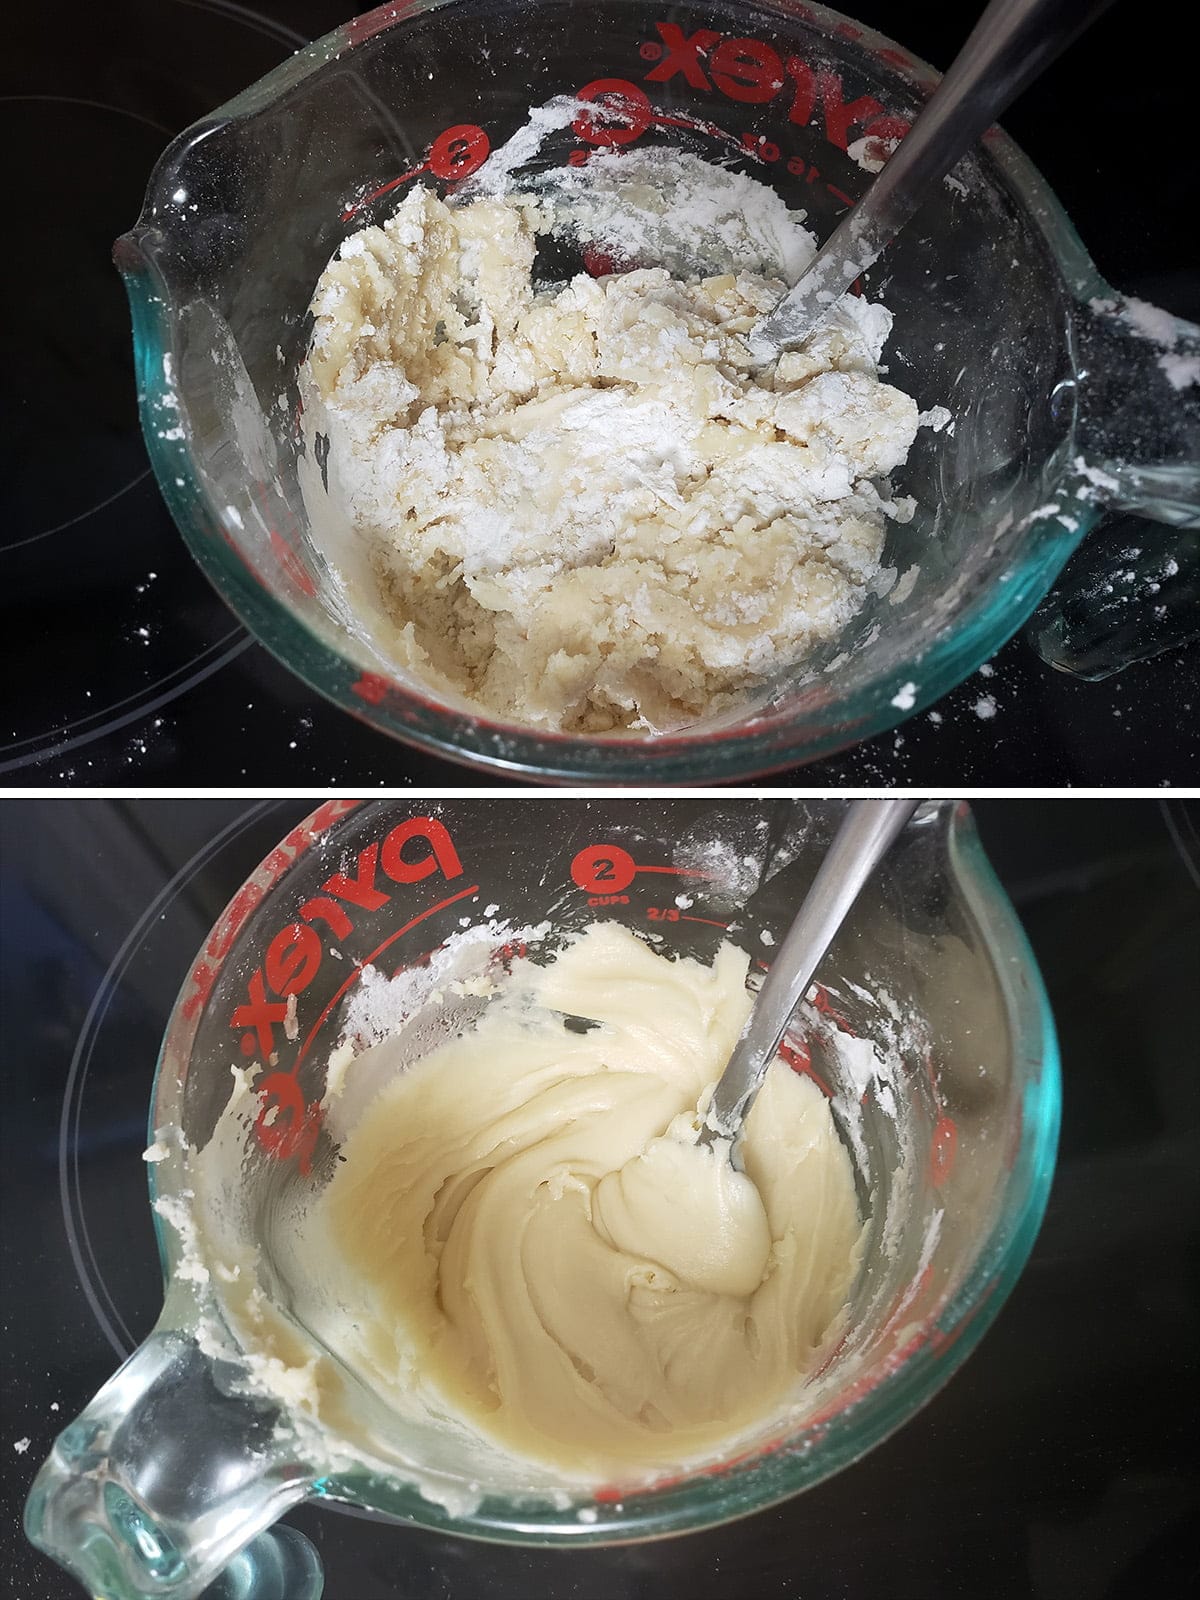 Two photos showing the progression of the maple glaze. The top photo shows a raggedy mix, the bottom shows a smooth glaze.